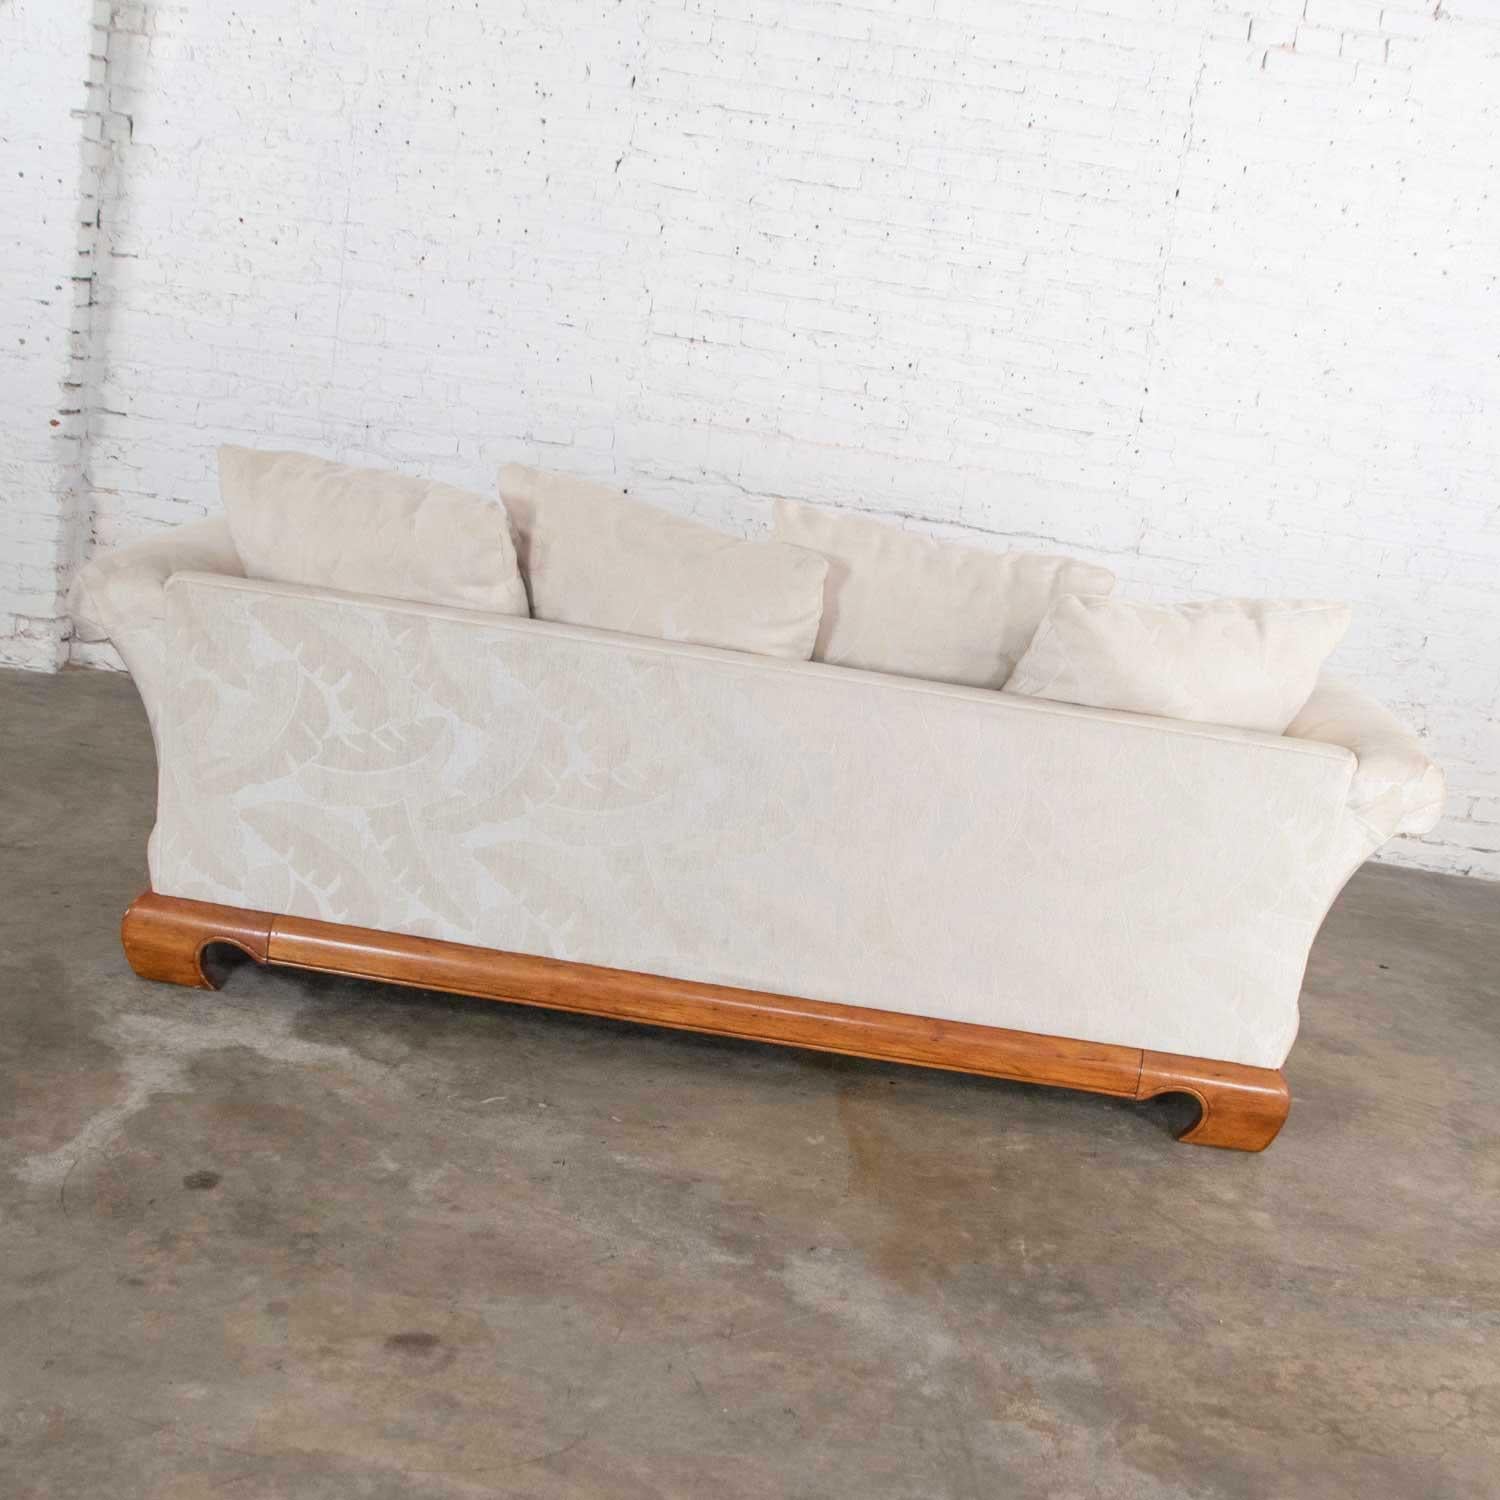 20th Century Chinoiserie Chow Leg Ming Style Sofa by Schnadig International Furniture